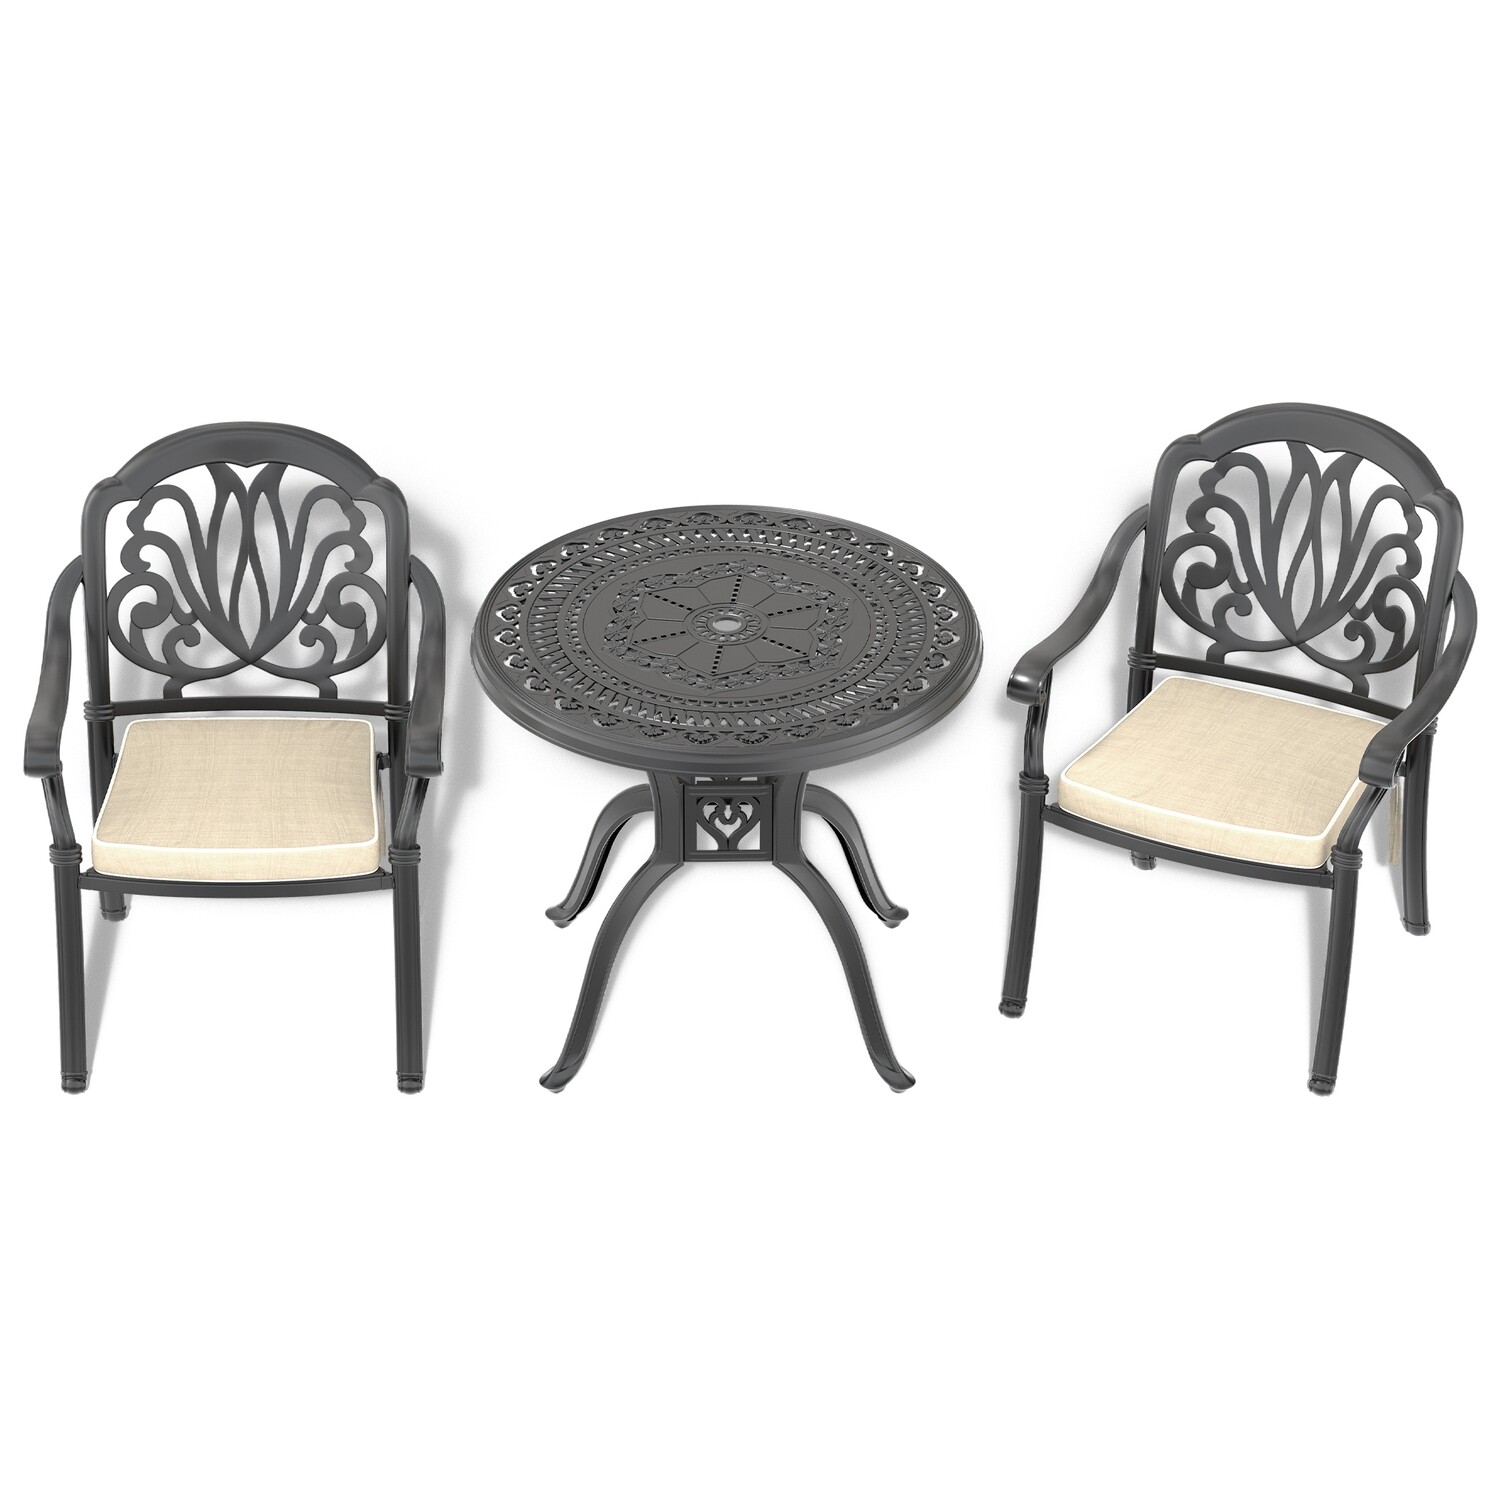 3-Piece Set Of Cast Aluminum Patio Furniture With Black Frame and Seat Cushions In Random Colors, Options: Yes+Complete Patio Set+Black+Weather Resistant Frame+Water Resistant Cushion+Garden & Outdoor+Casual+Complete Patio Sets+Fiber Foam and Polyester Fiber Pad+Aluminium Alloy